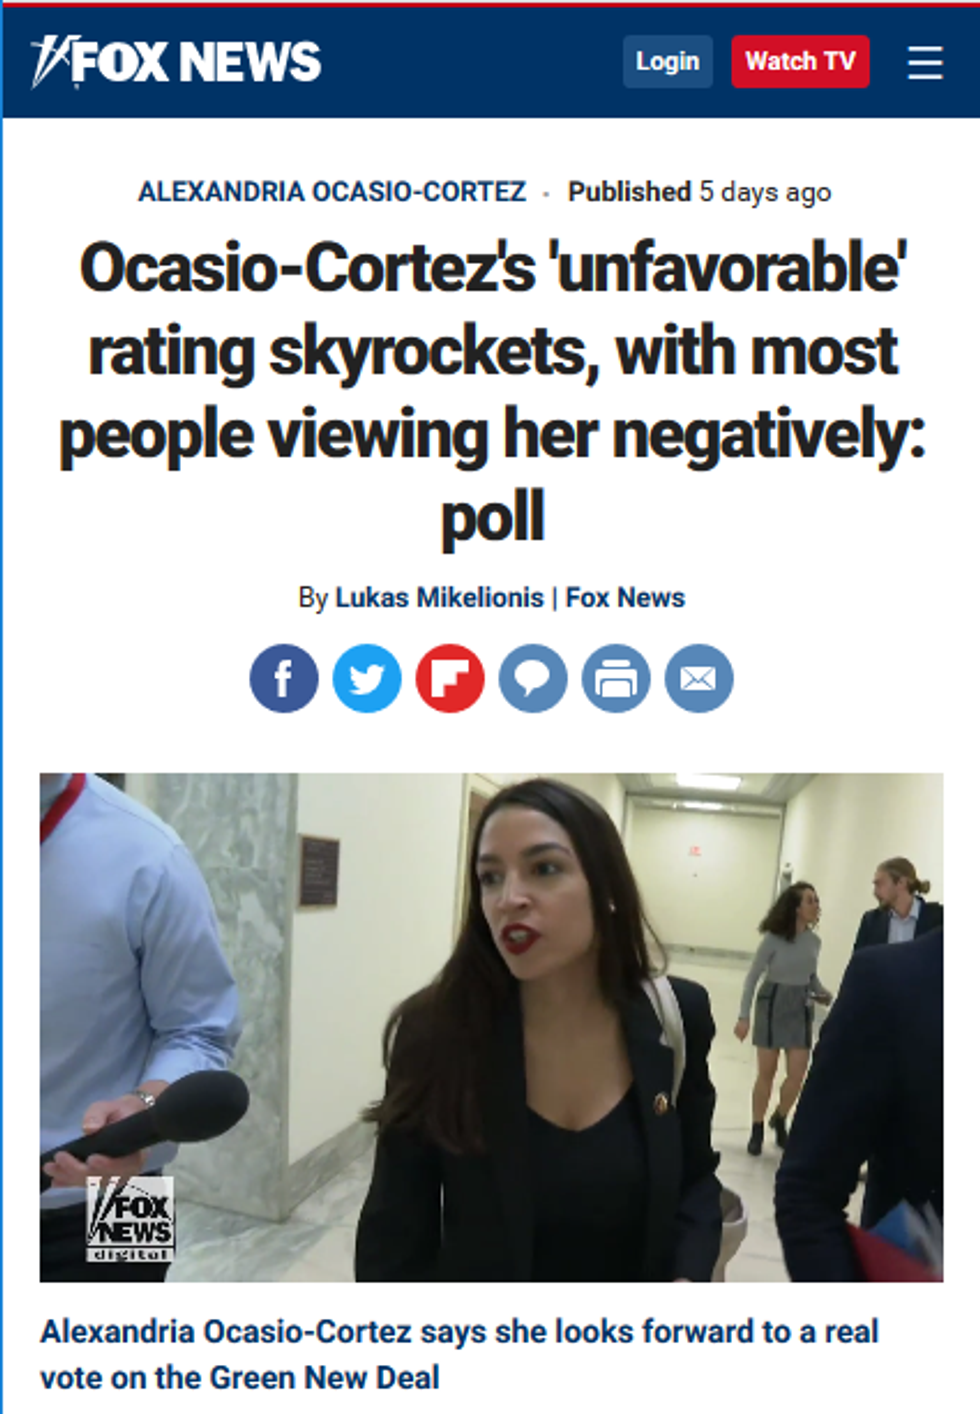 Fox: Ocasio-Cortez's 'unfavorable' rating skyrockets, with most people viewing her negatively: poll